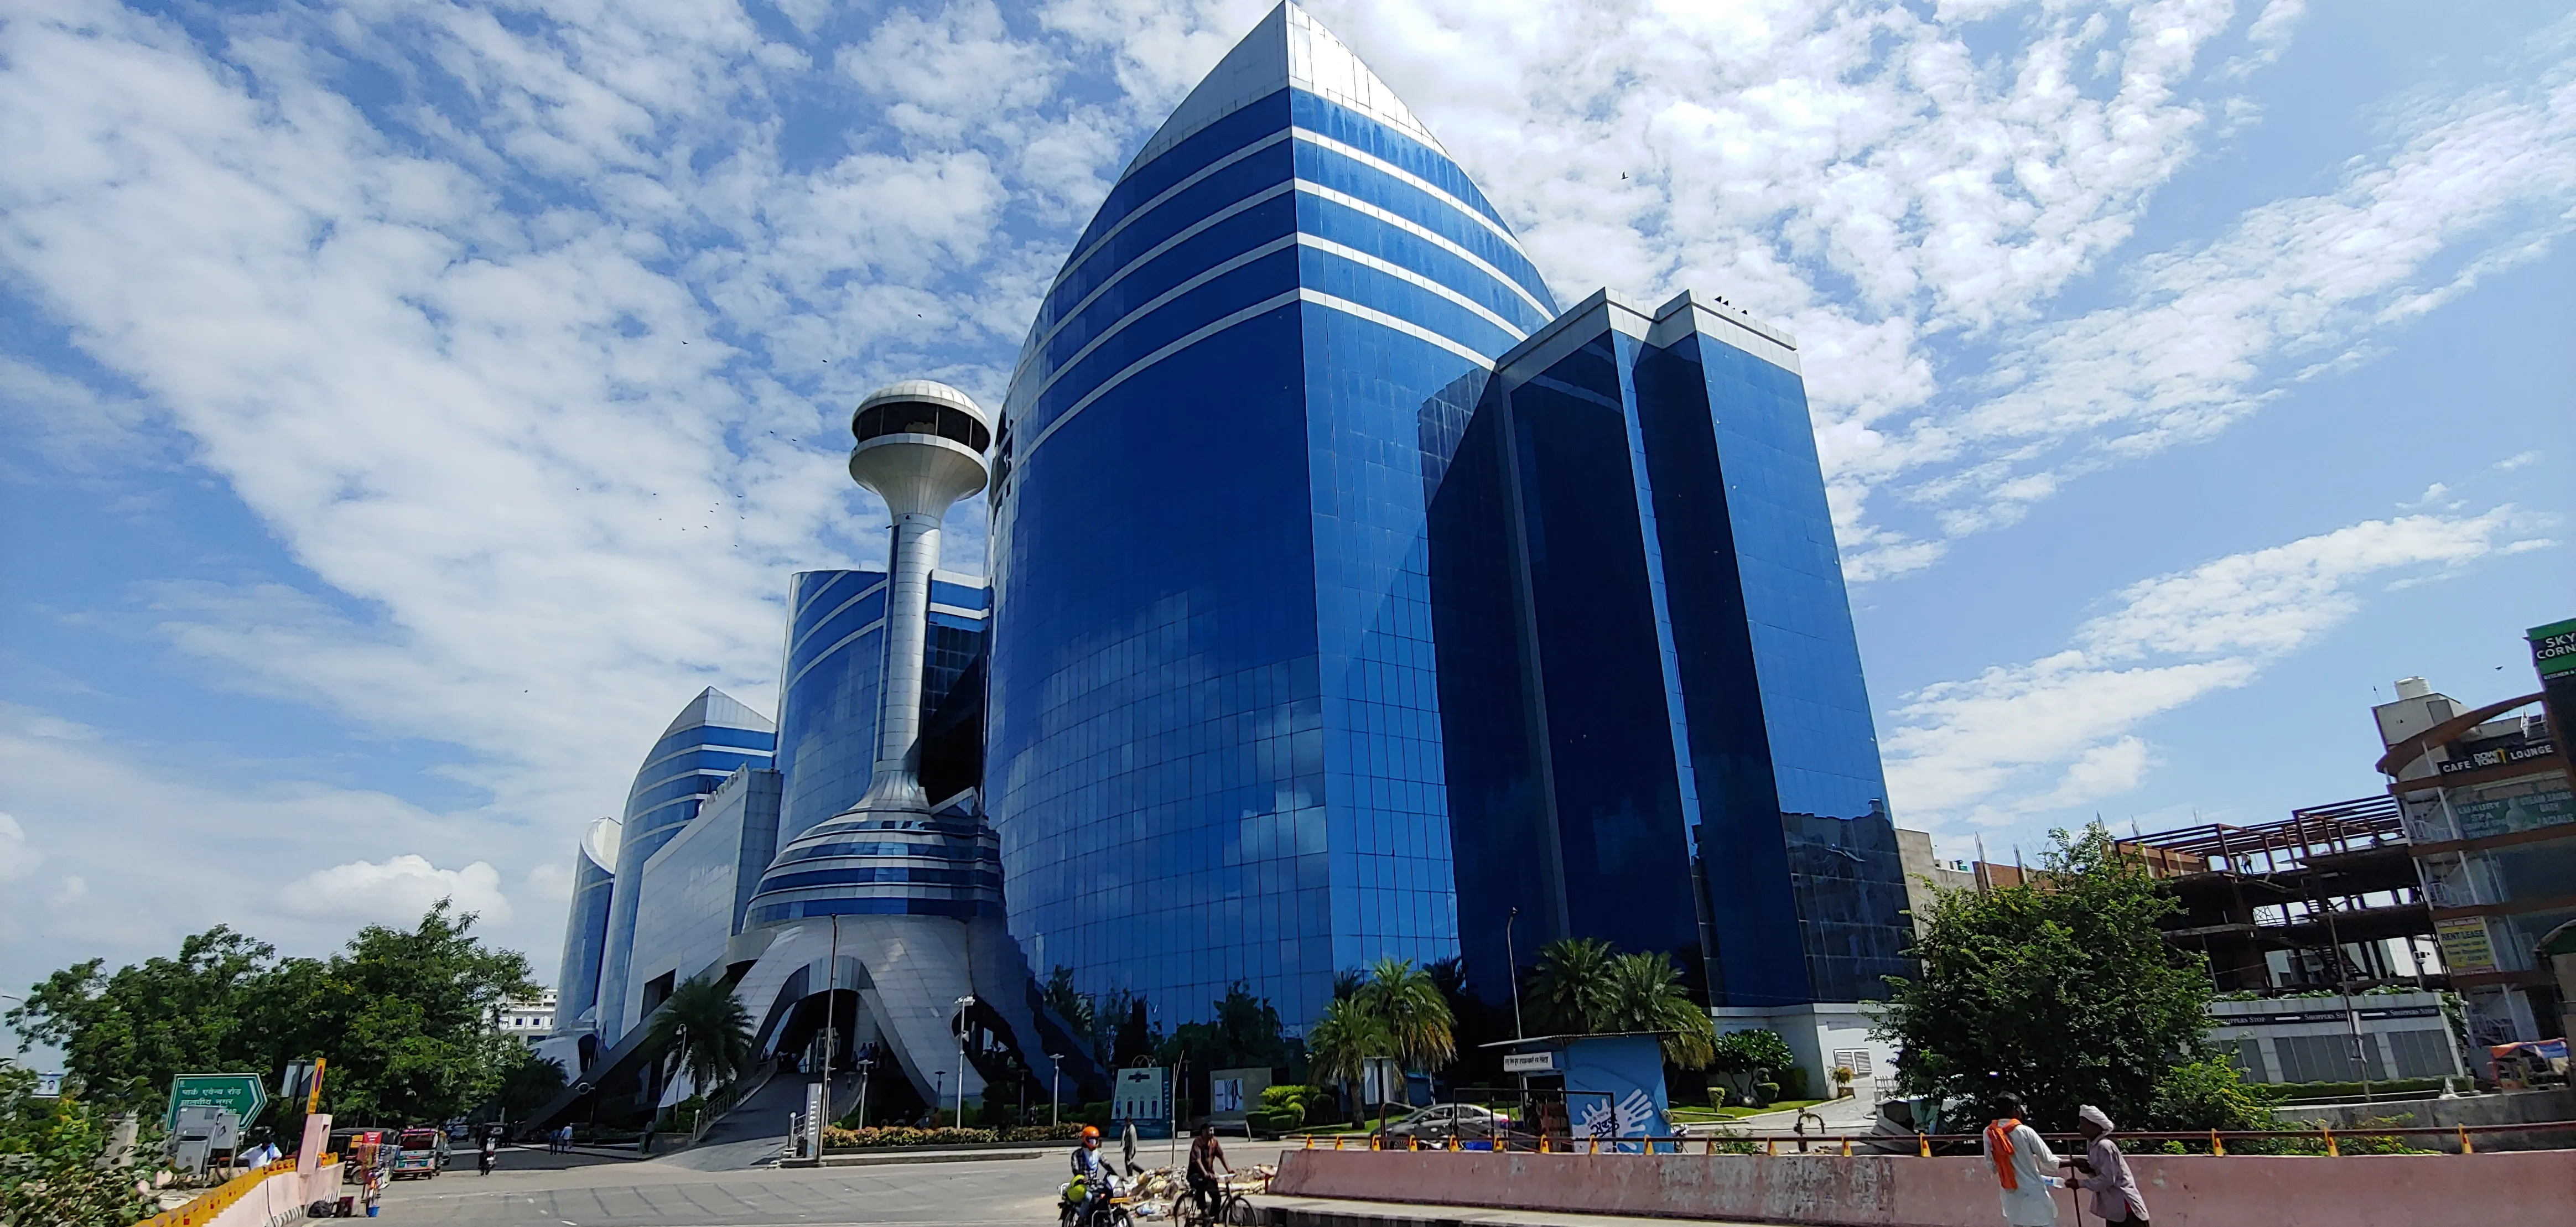 World Trade Park in India, central_asia | Handbags,Shoes,Clothes,Gifts,Home Decor,Cosmetics,Sportswear - Country Helper